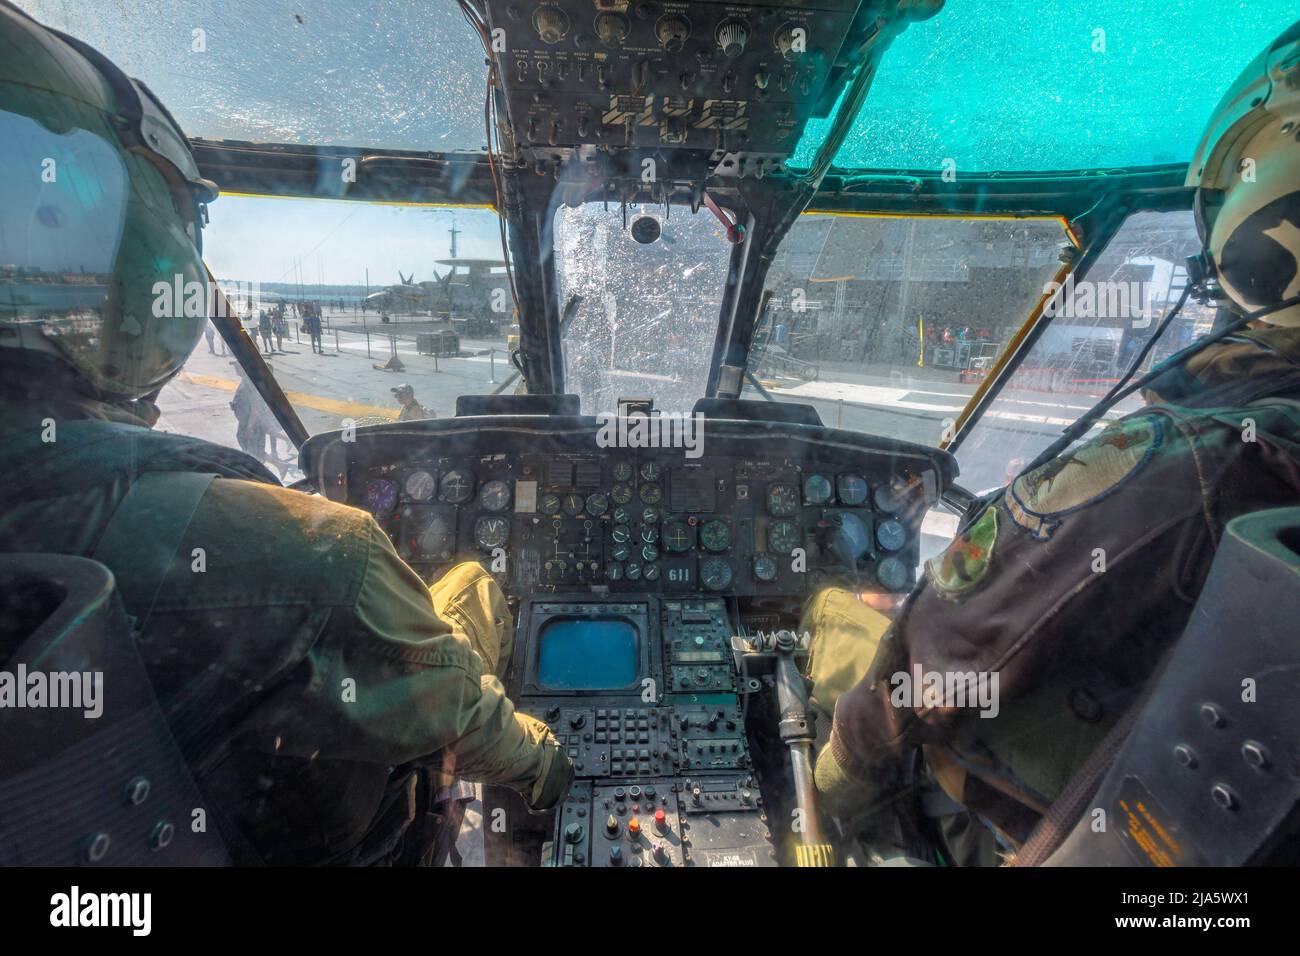 San Diego, California, United States - JULY 2018: cockpit of helicopter Sikorsky SH-3 Sea King. USS Midway Battleship museum. American twin-engined Stock Photo